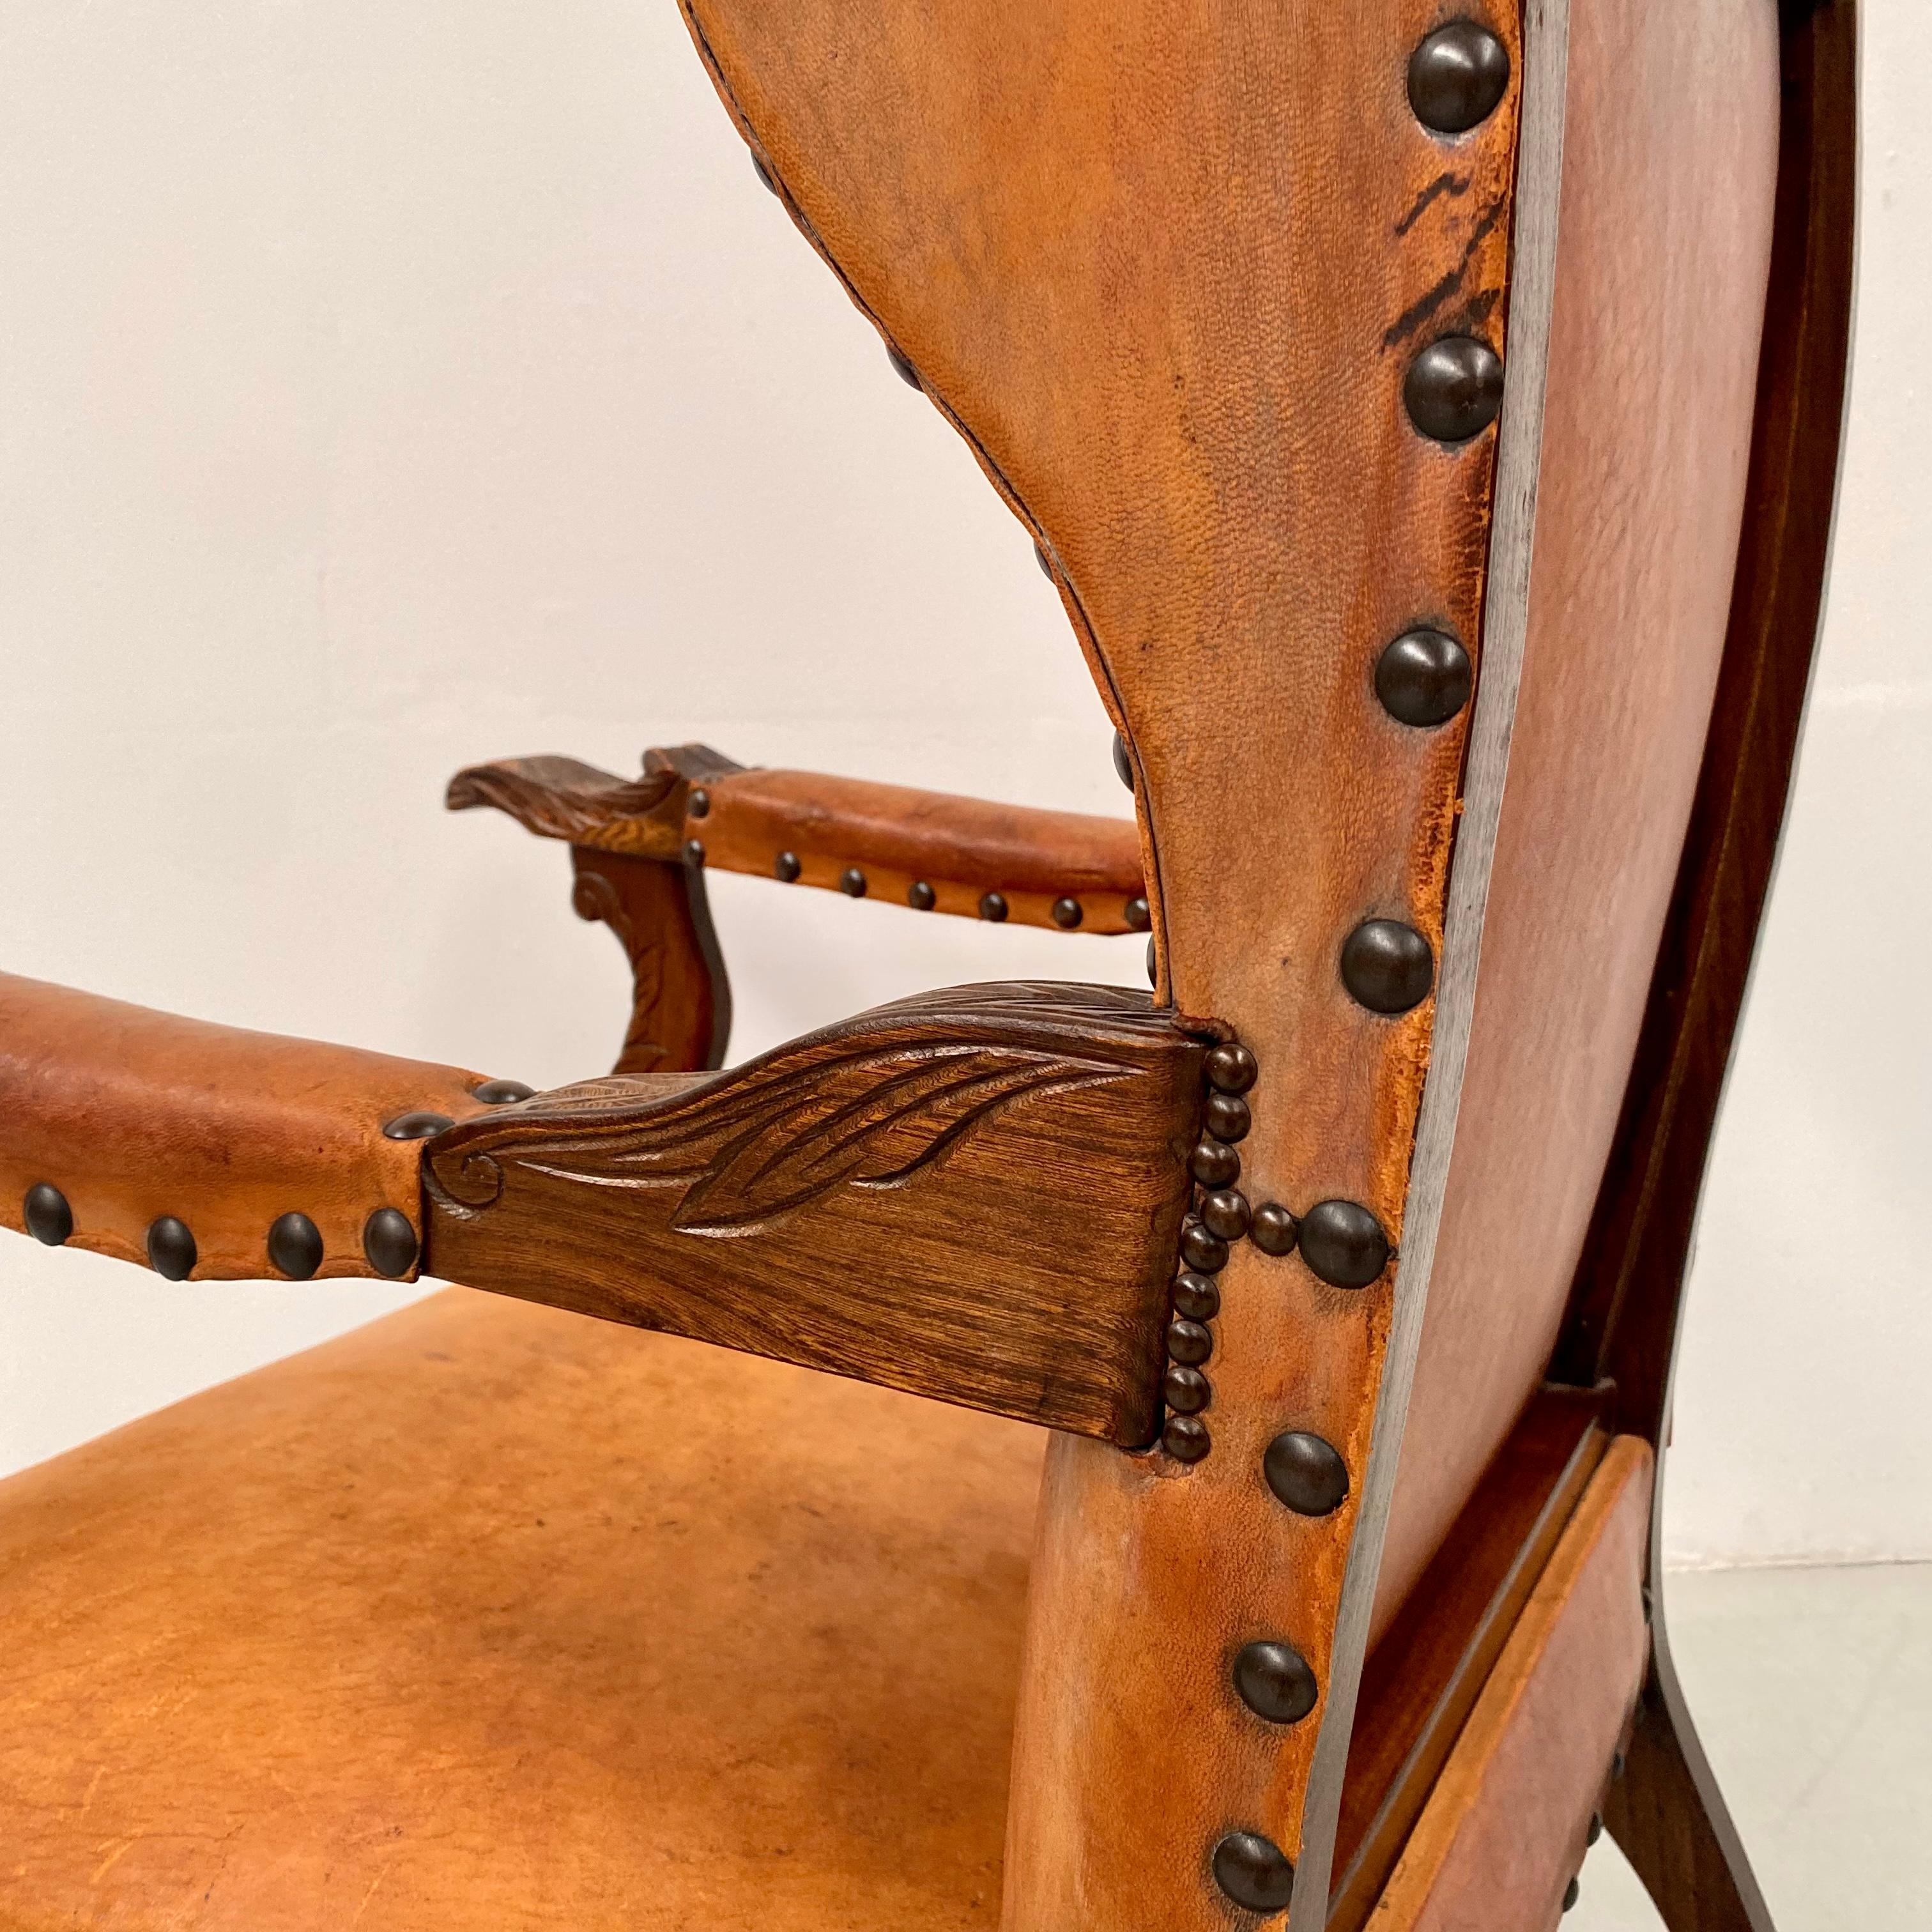 Brutalist Antique French Wingchair in Cognac Leather with Carvings, 1920s.